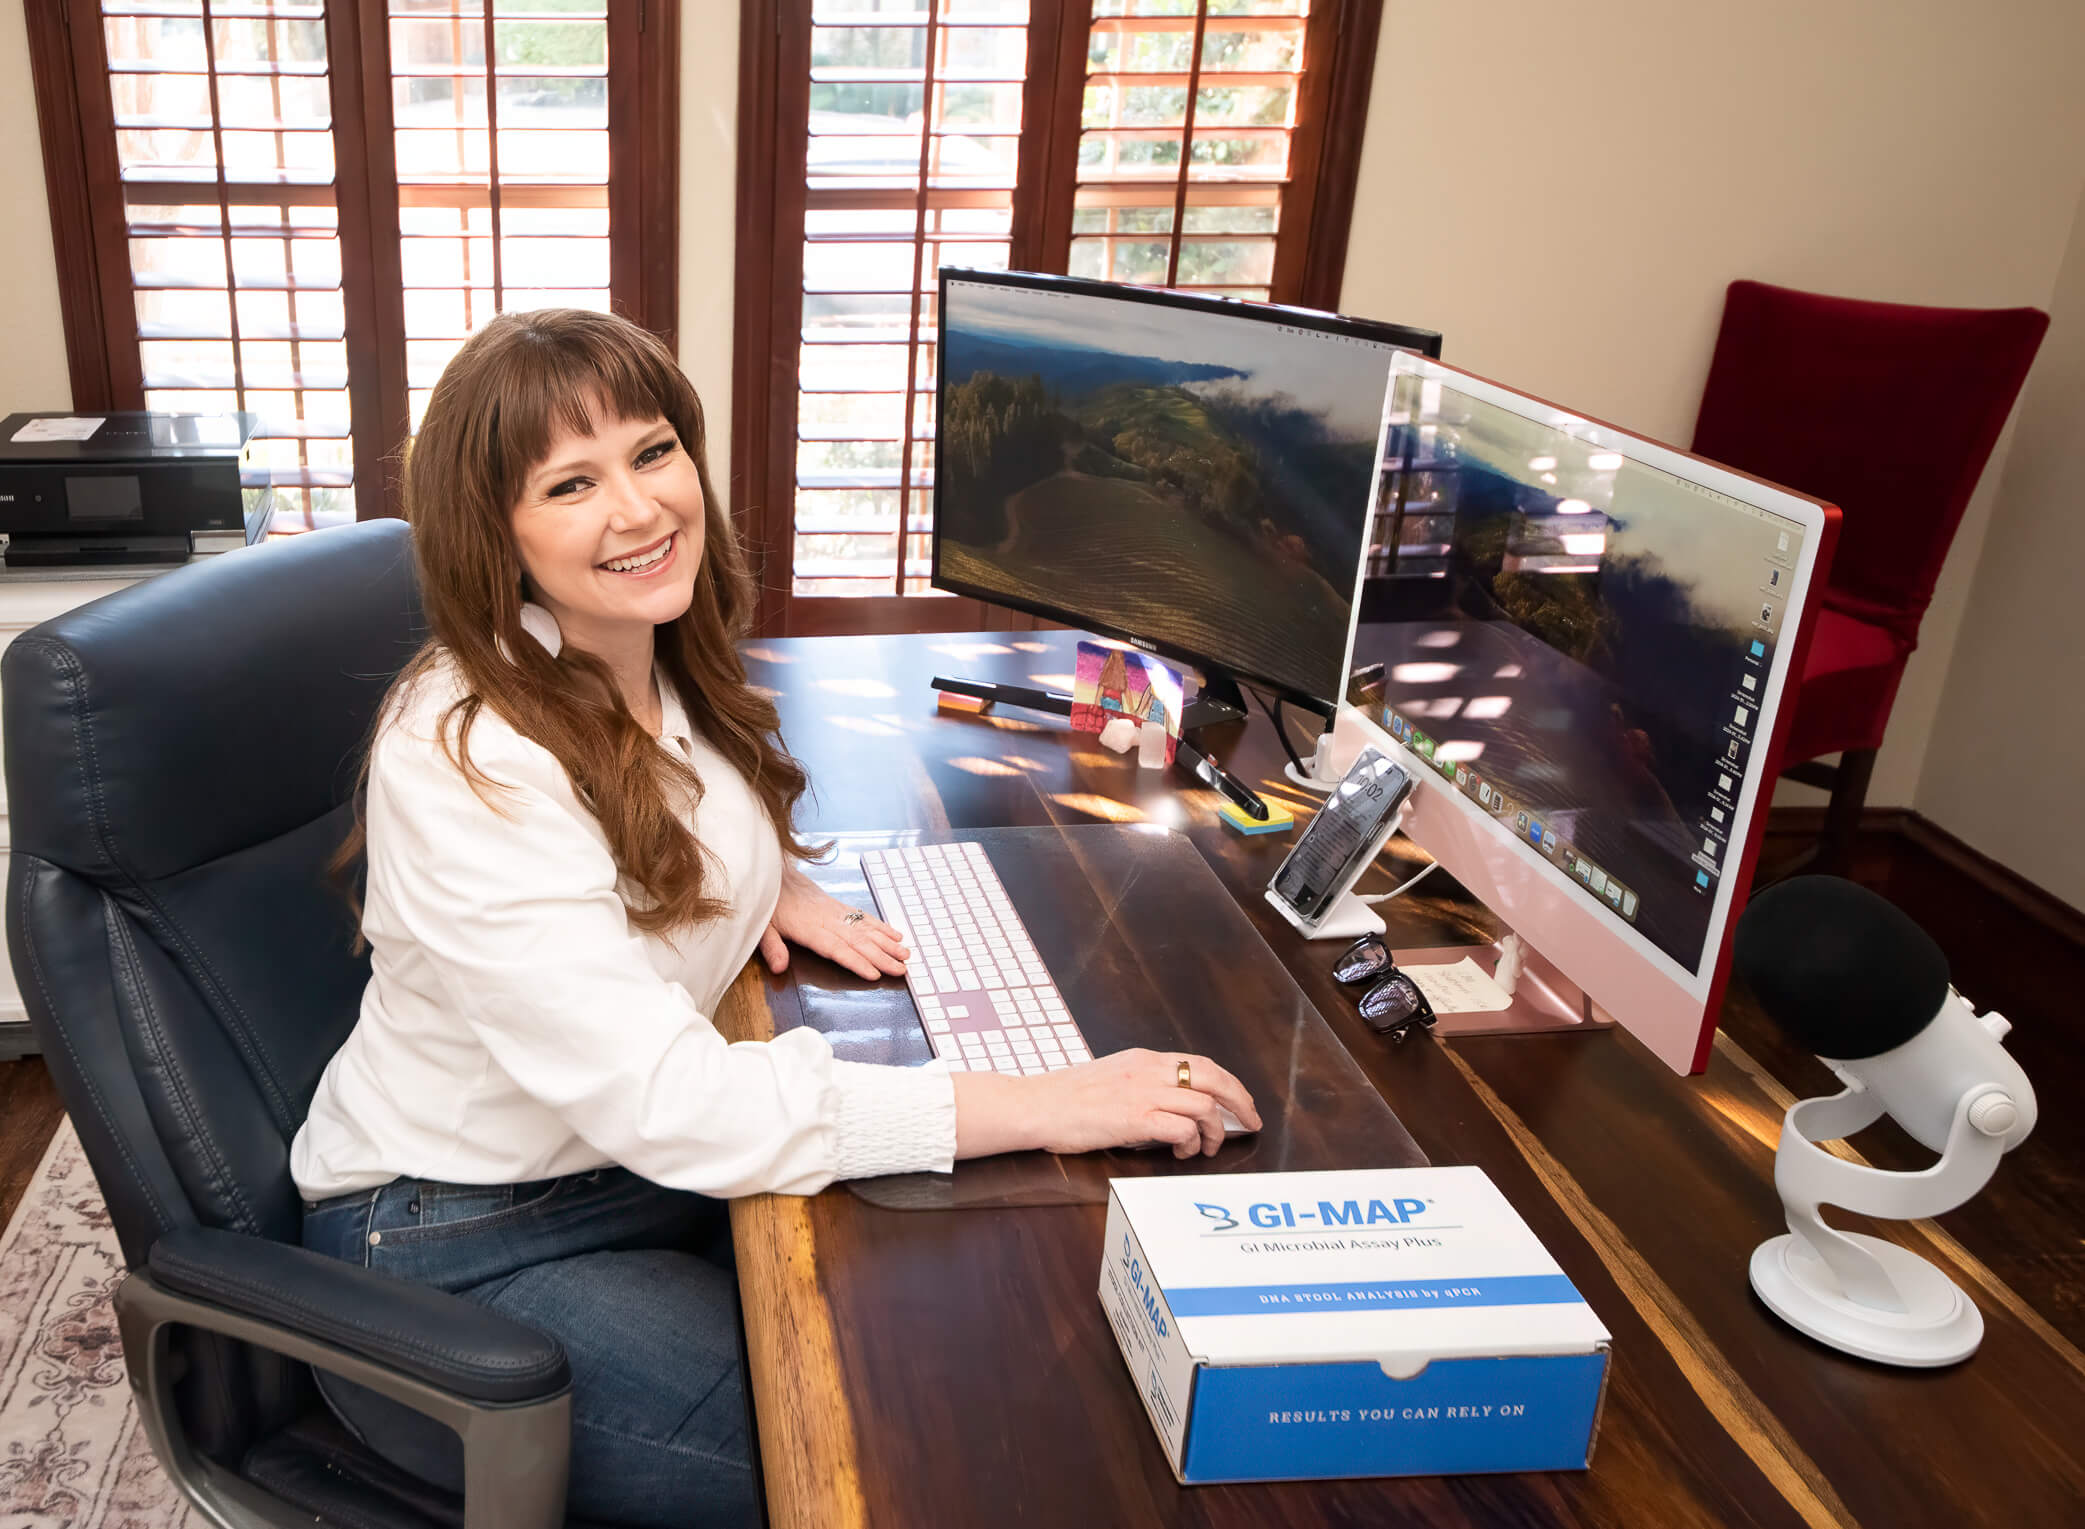 holistic hormone specialist working at desk in office